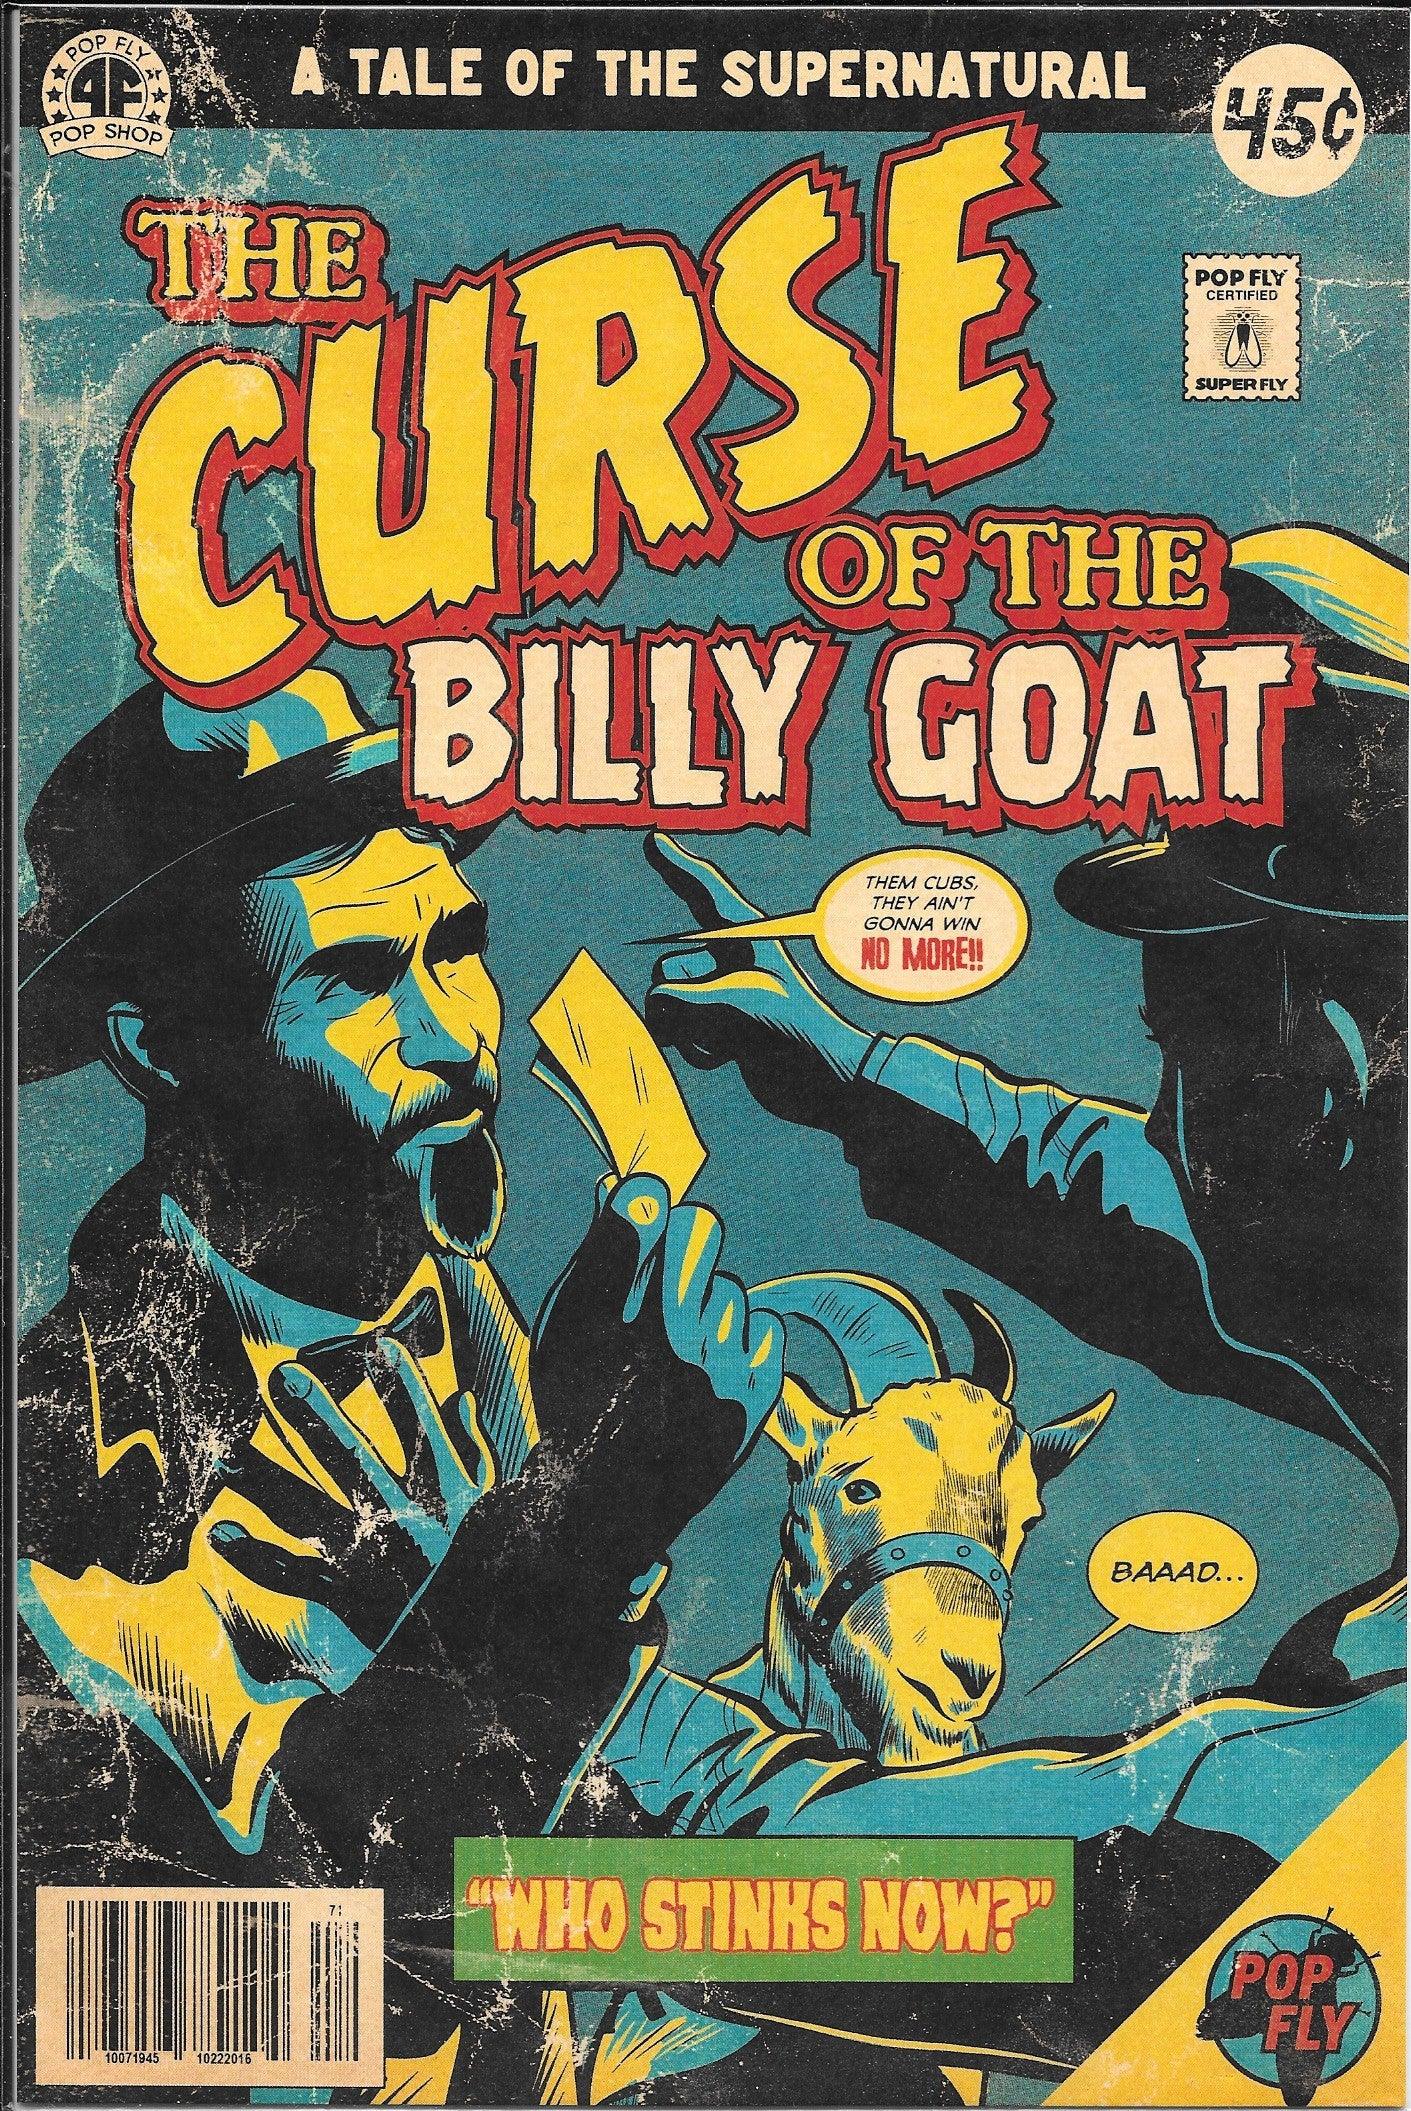 "The Curse of the Billy Goat" Pop Fly Pop Shop Print #72 – Signed by Daniel Jacob Horine - PastPros